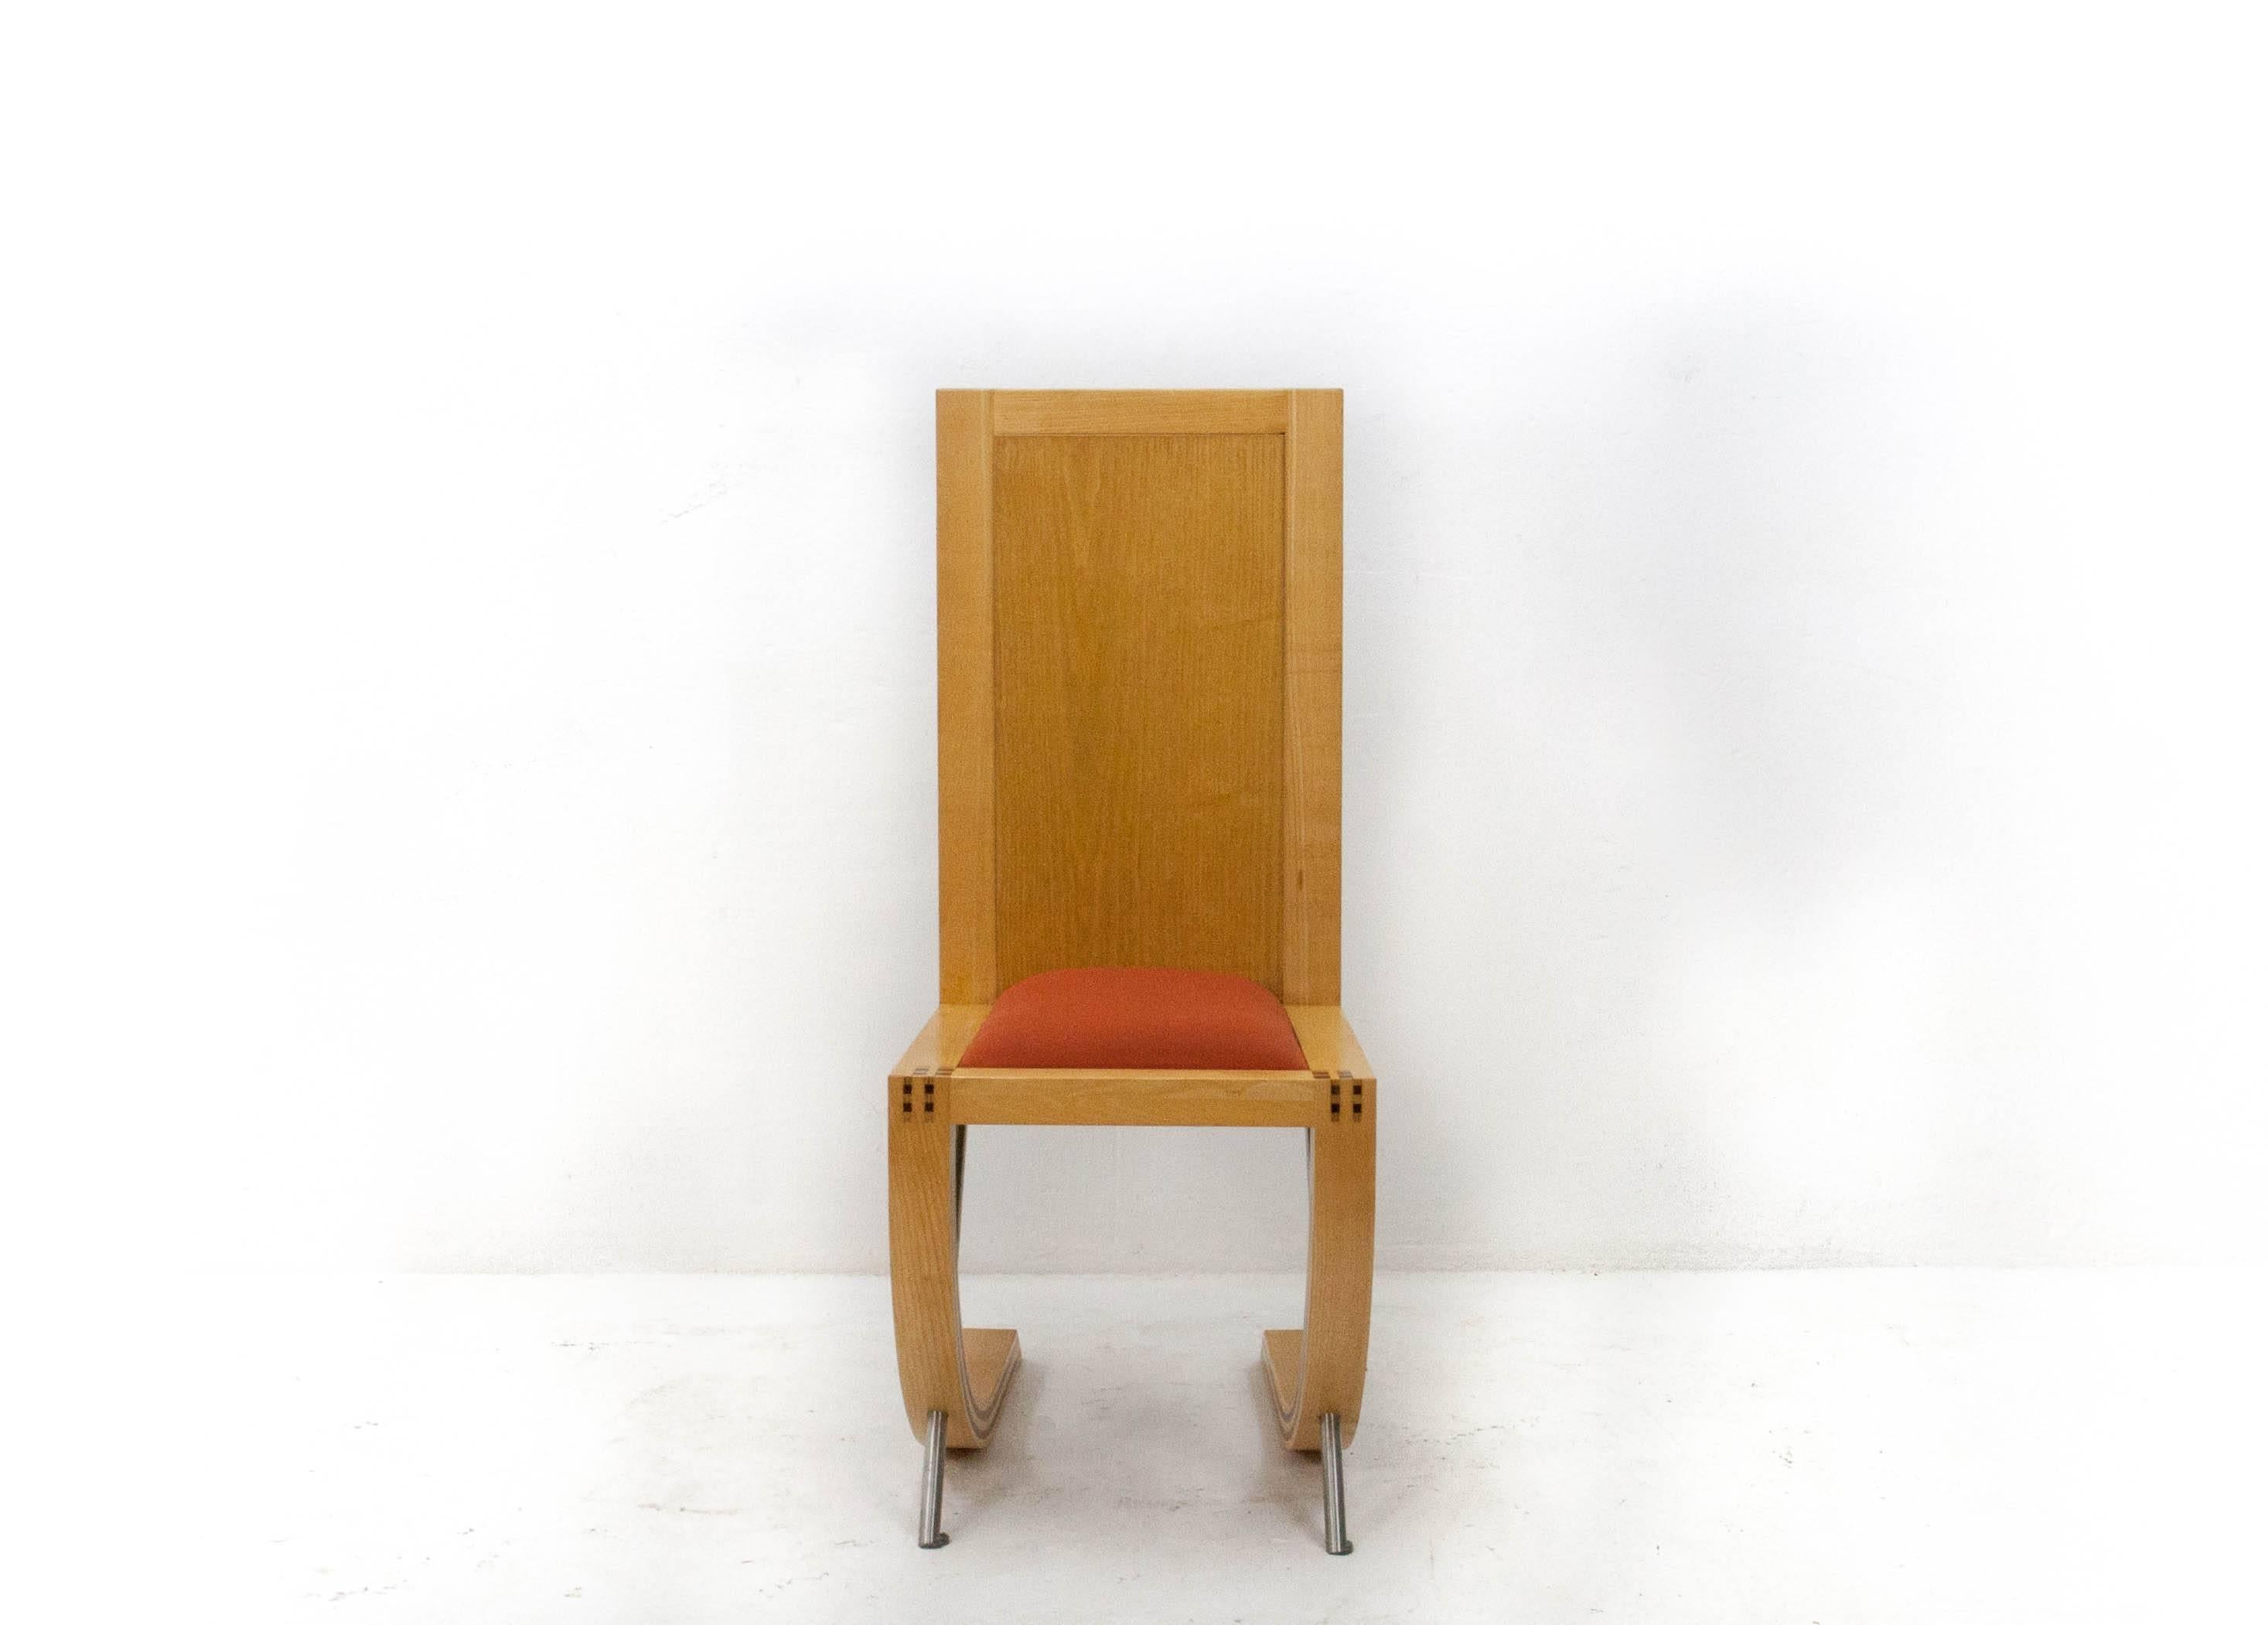 Dutch Handcrafted Decorative Chair, 2007